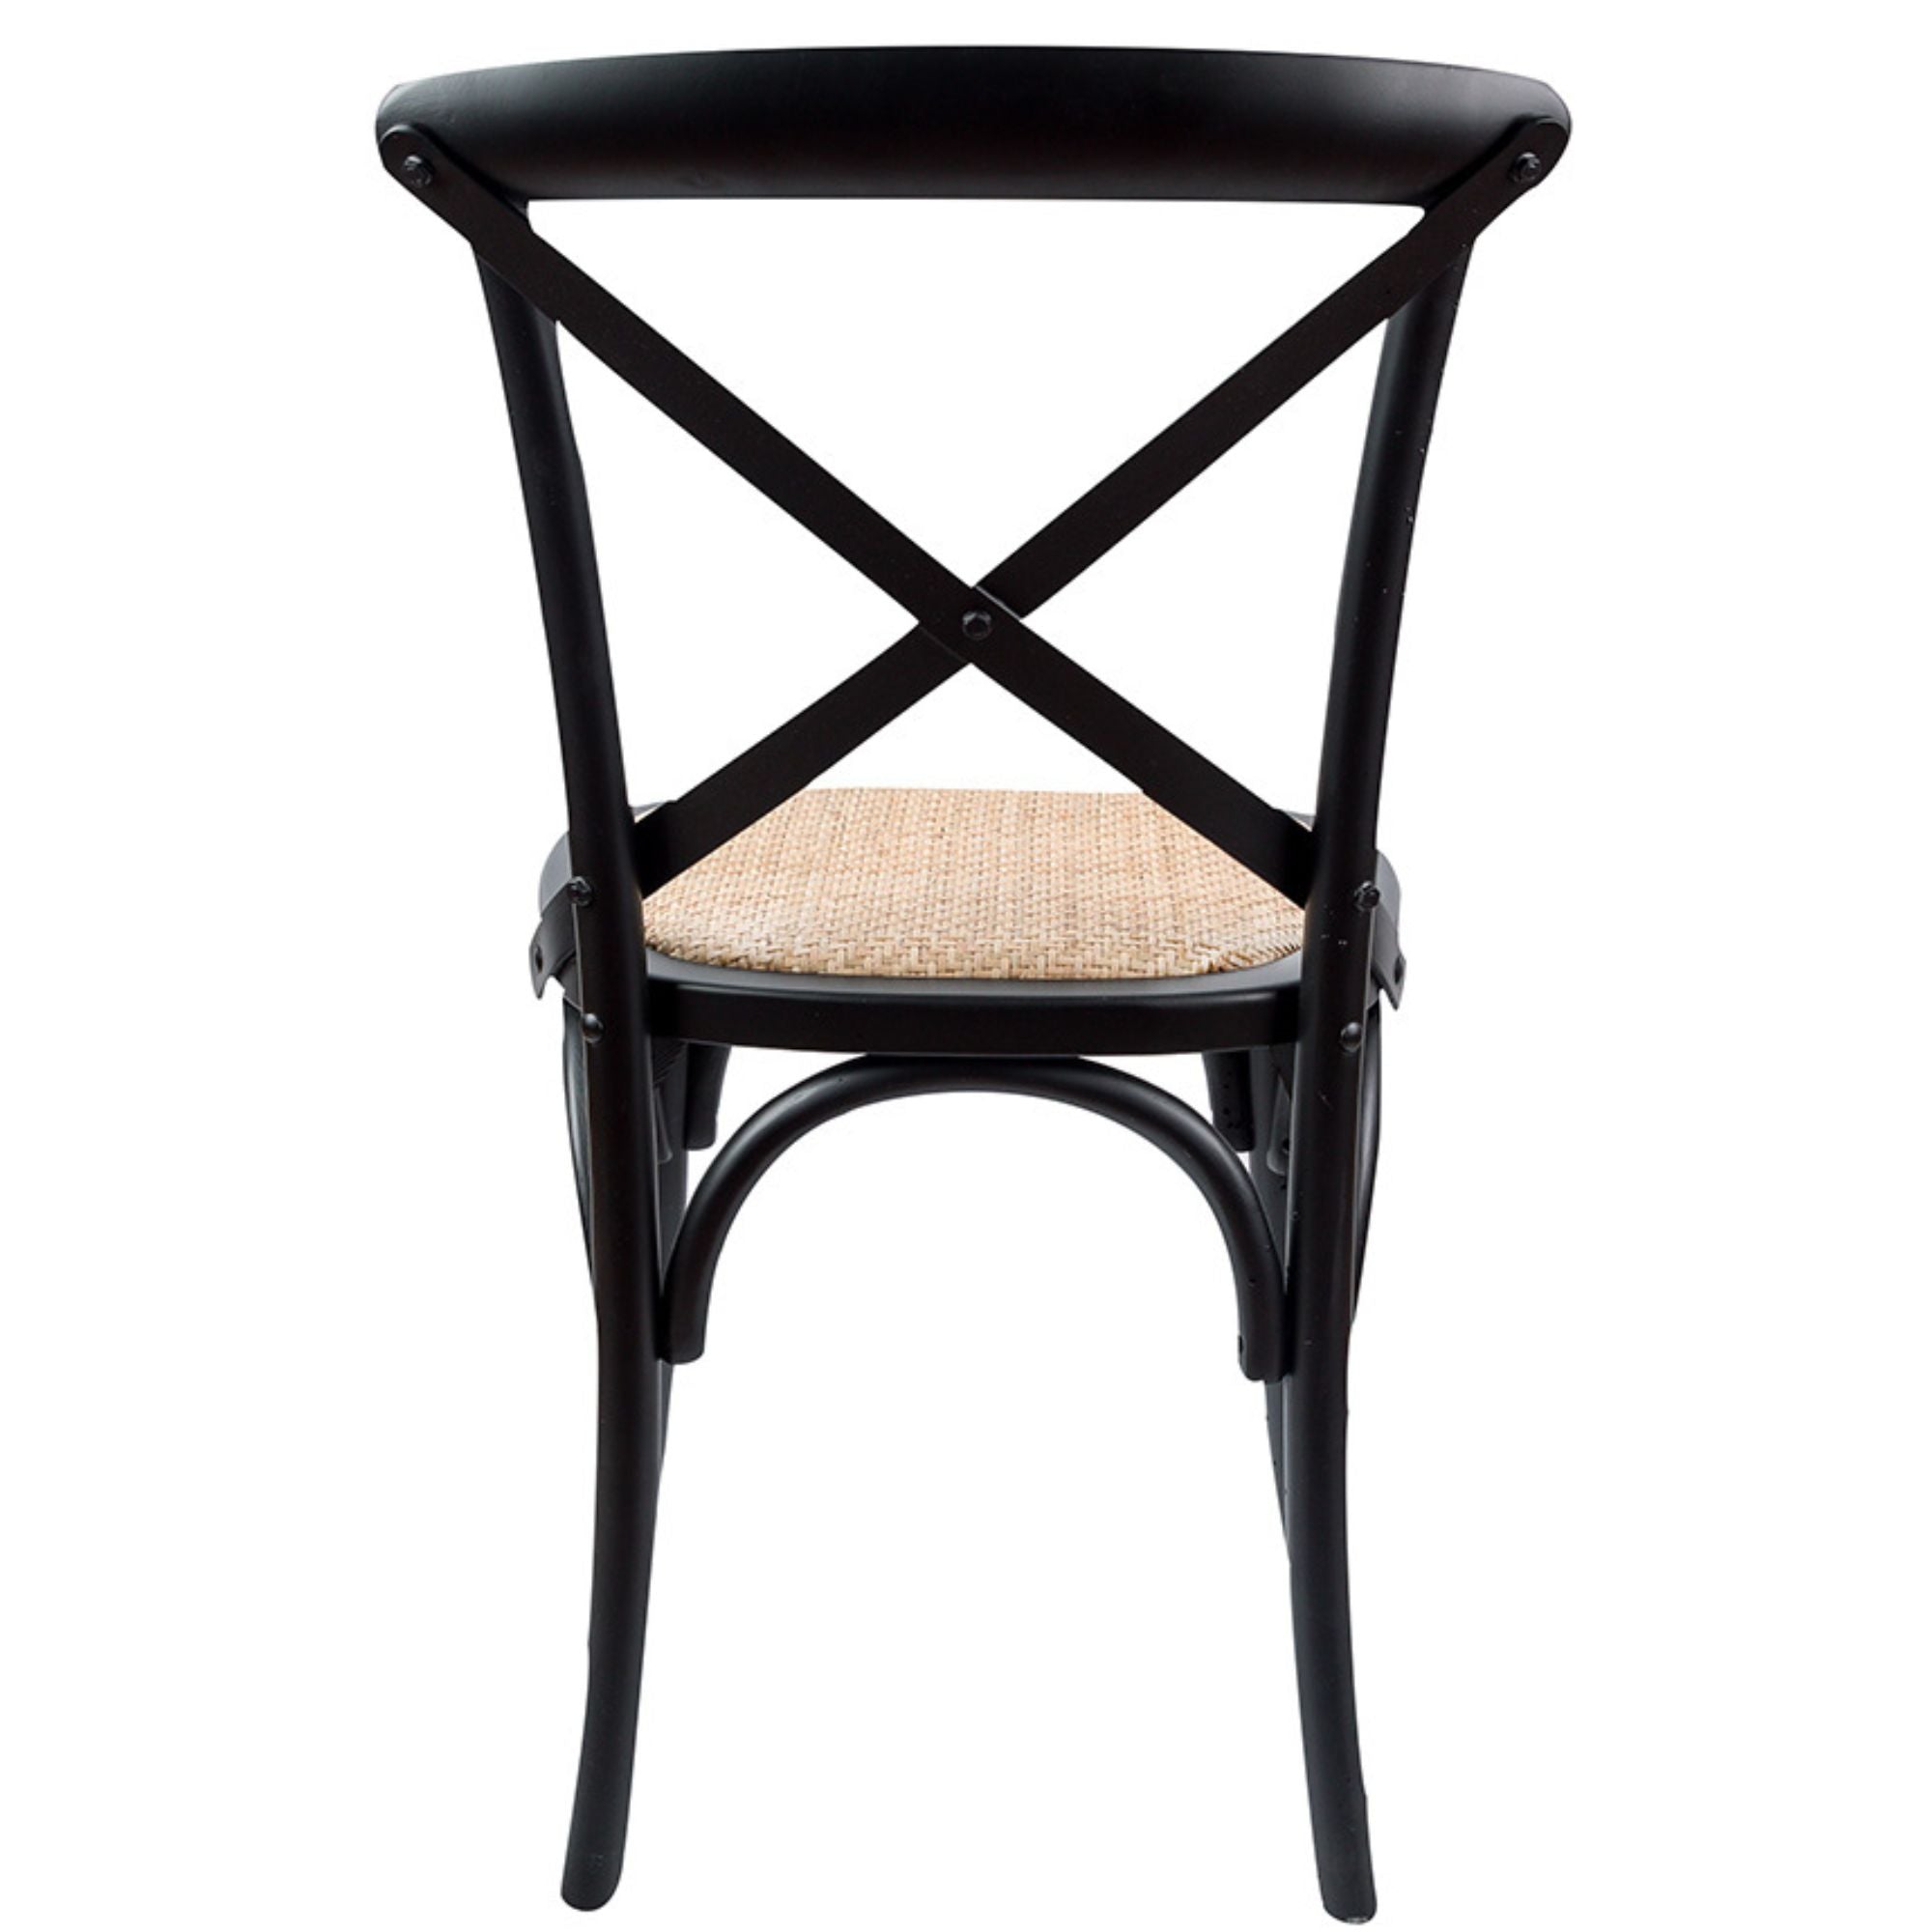 Crossback Dining Chair Set Of 2 Solid Birch Timber Wood Ratan Seat - Black